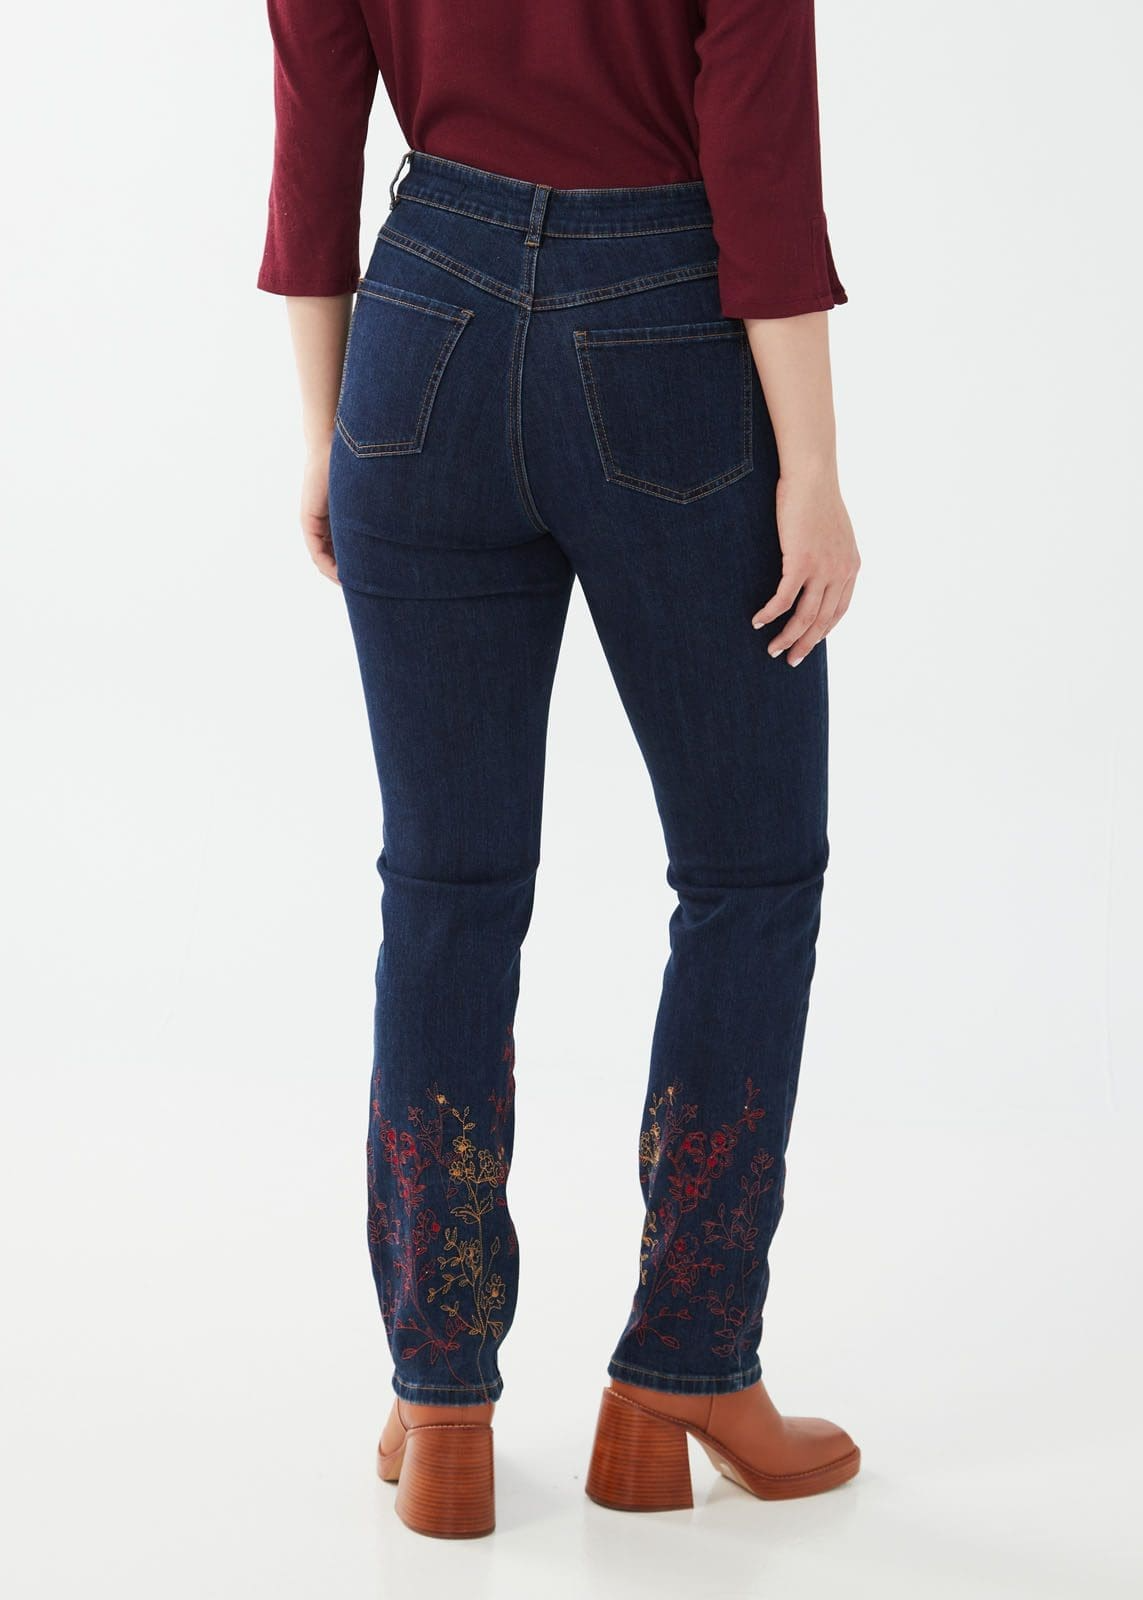 Suzanne Fall Floral Embroidered Jeans